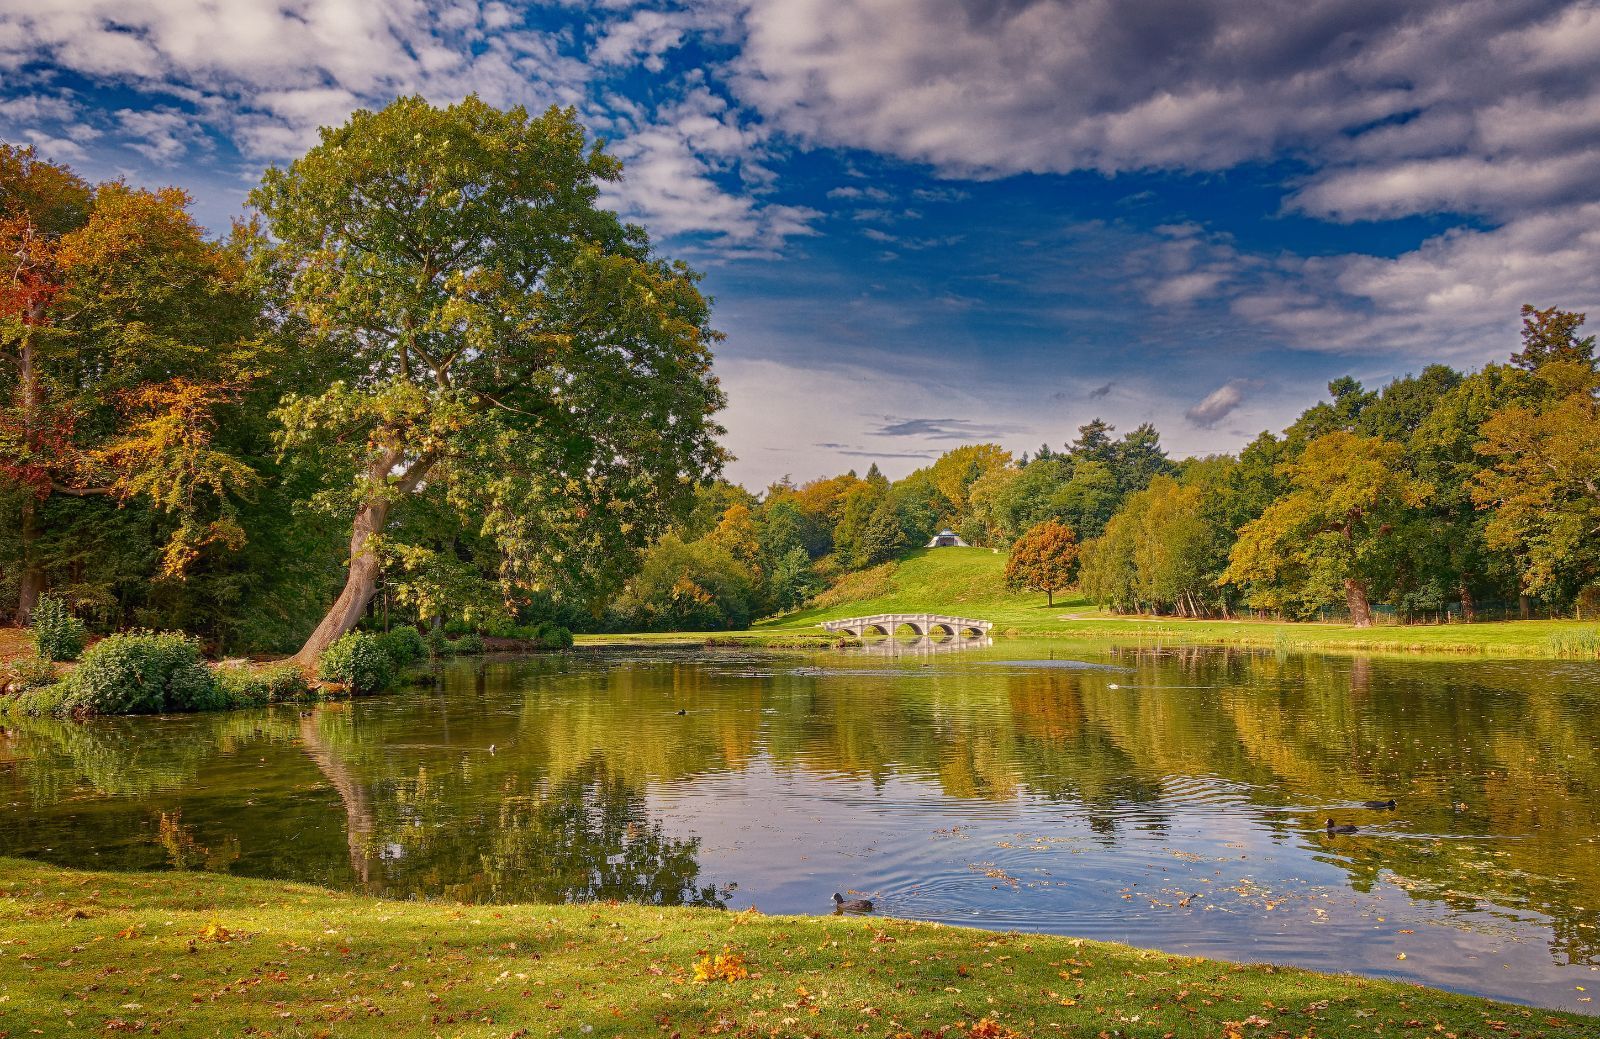 Painshill Park lake and trees in Great Britain